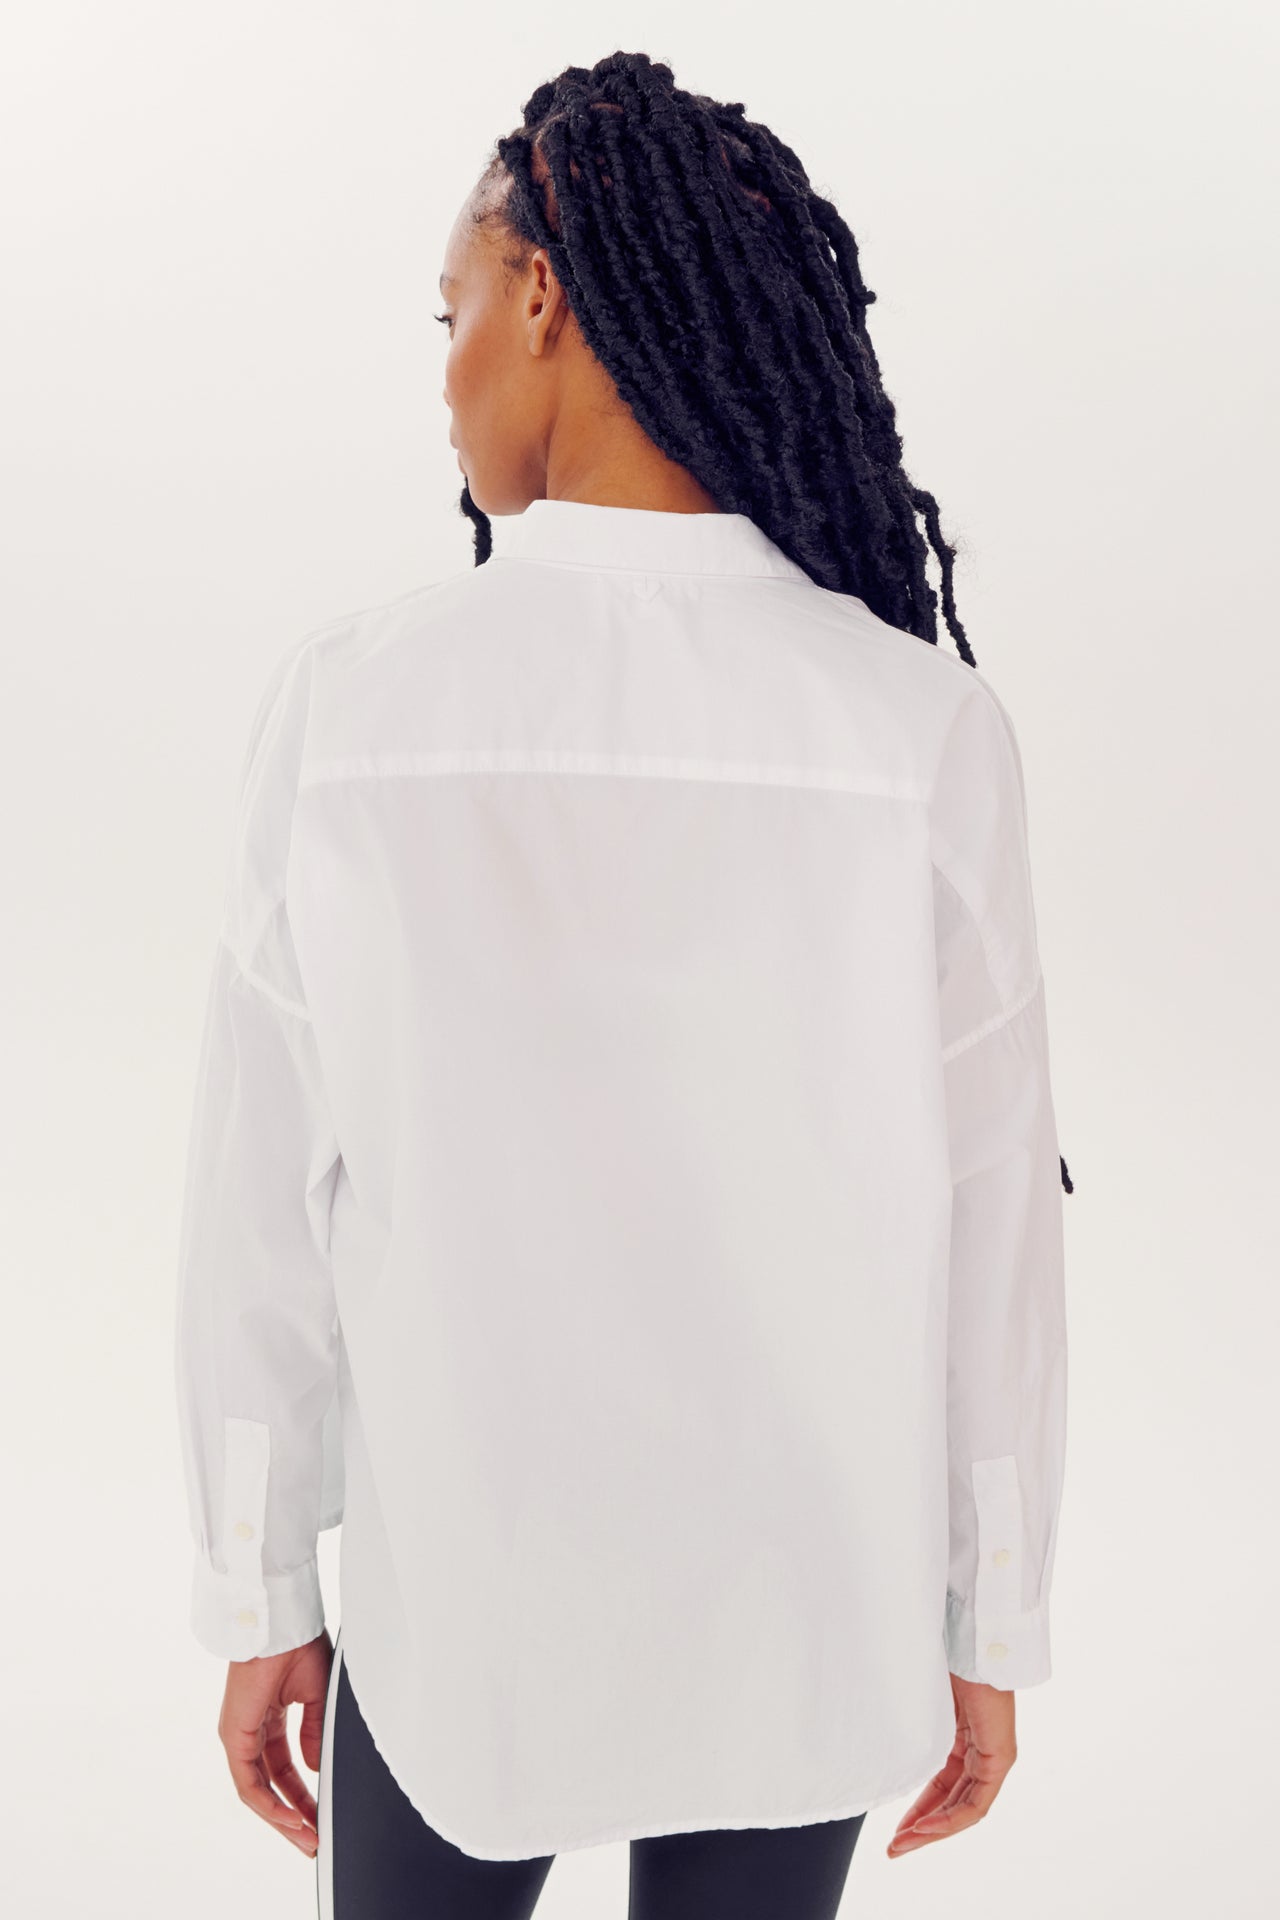 Woman wearing an Alex Mill x Splits59 Jo Shirt in White, viewed from behind.